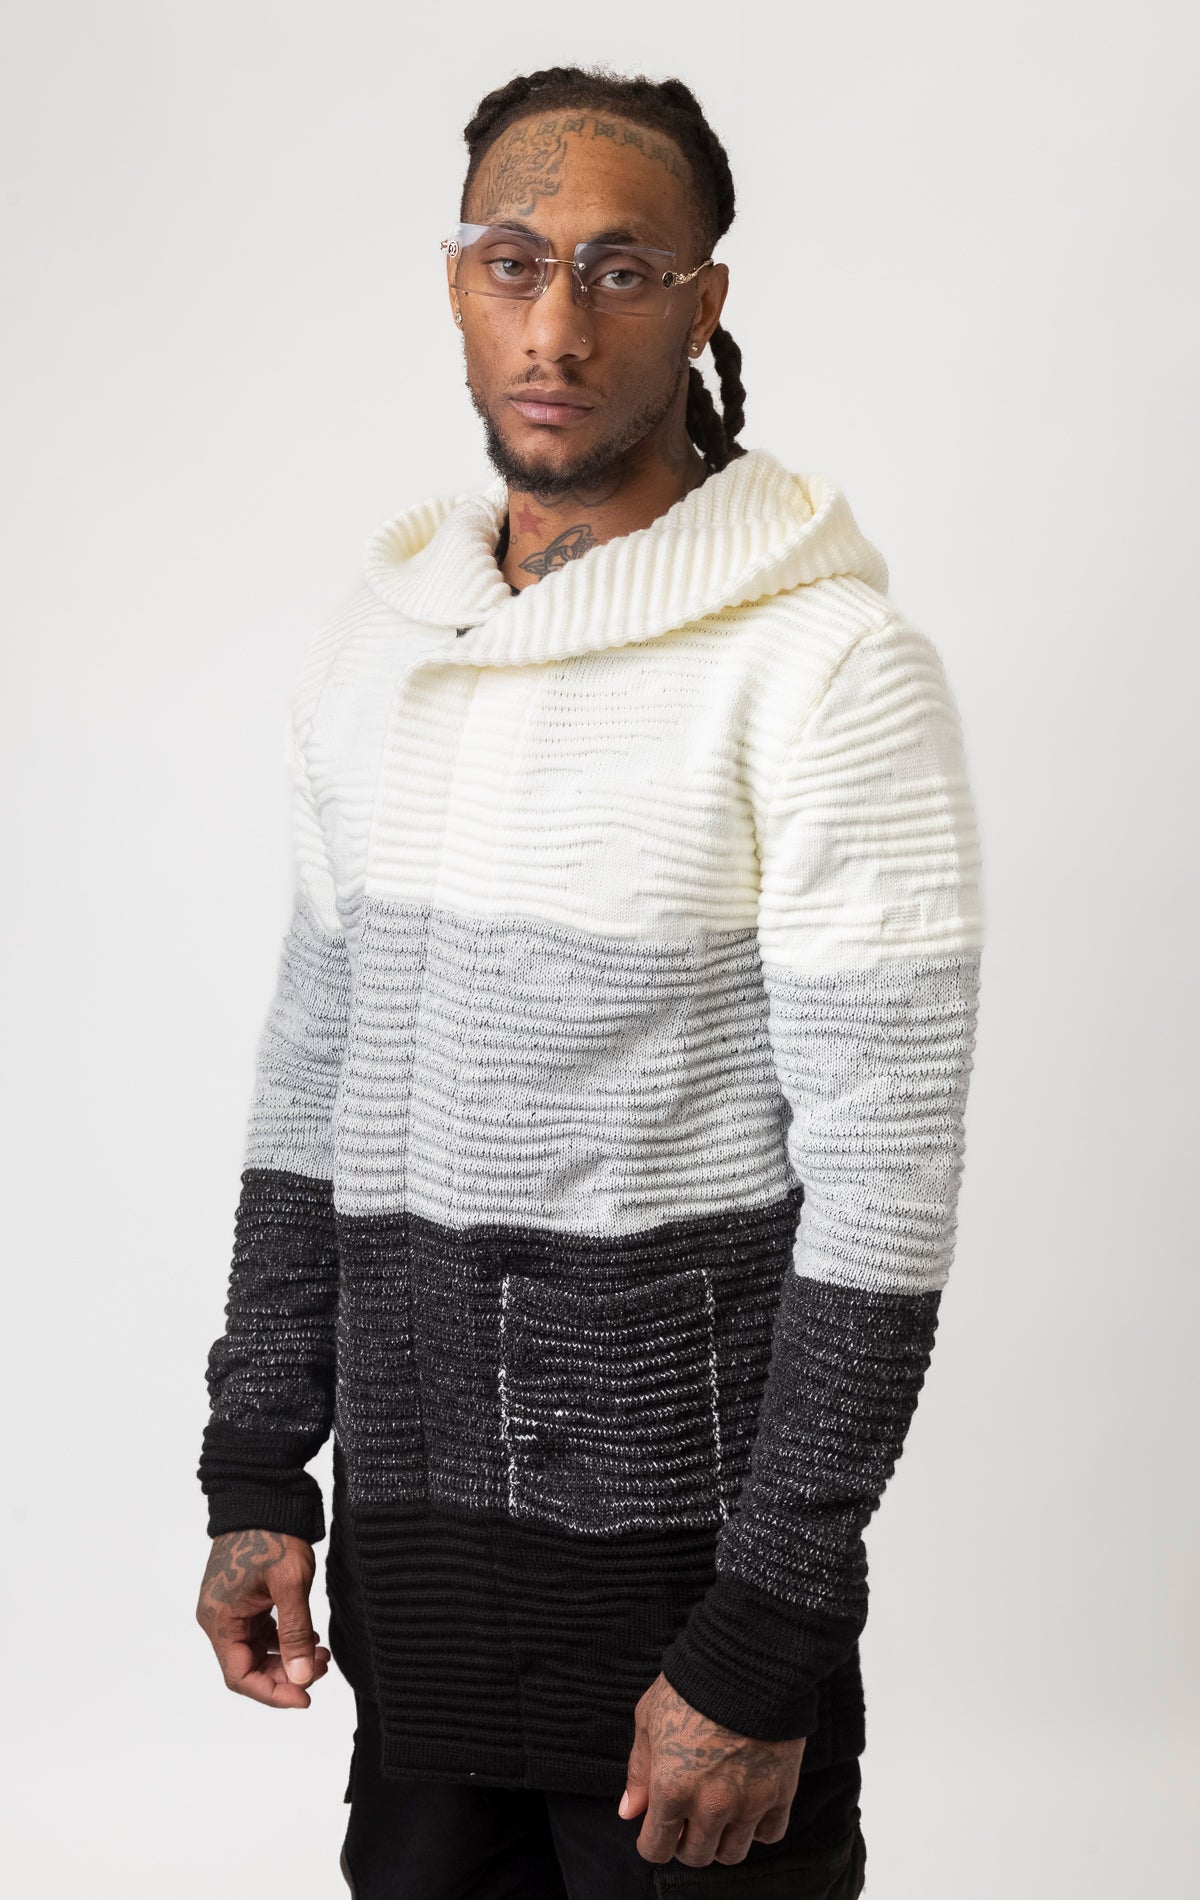 Three-tone cardigan sweater featuring a hoodie.